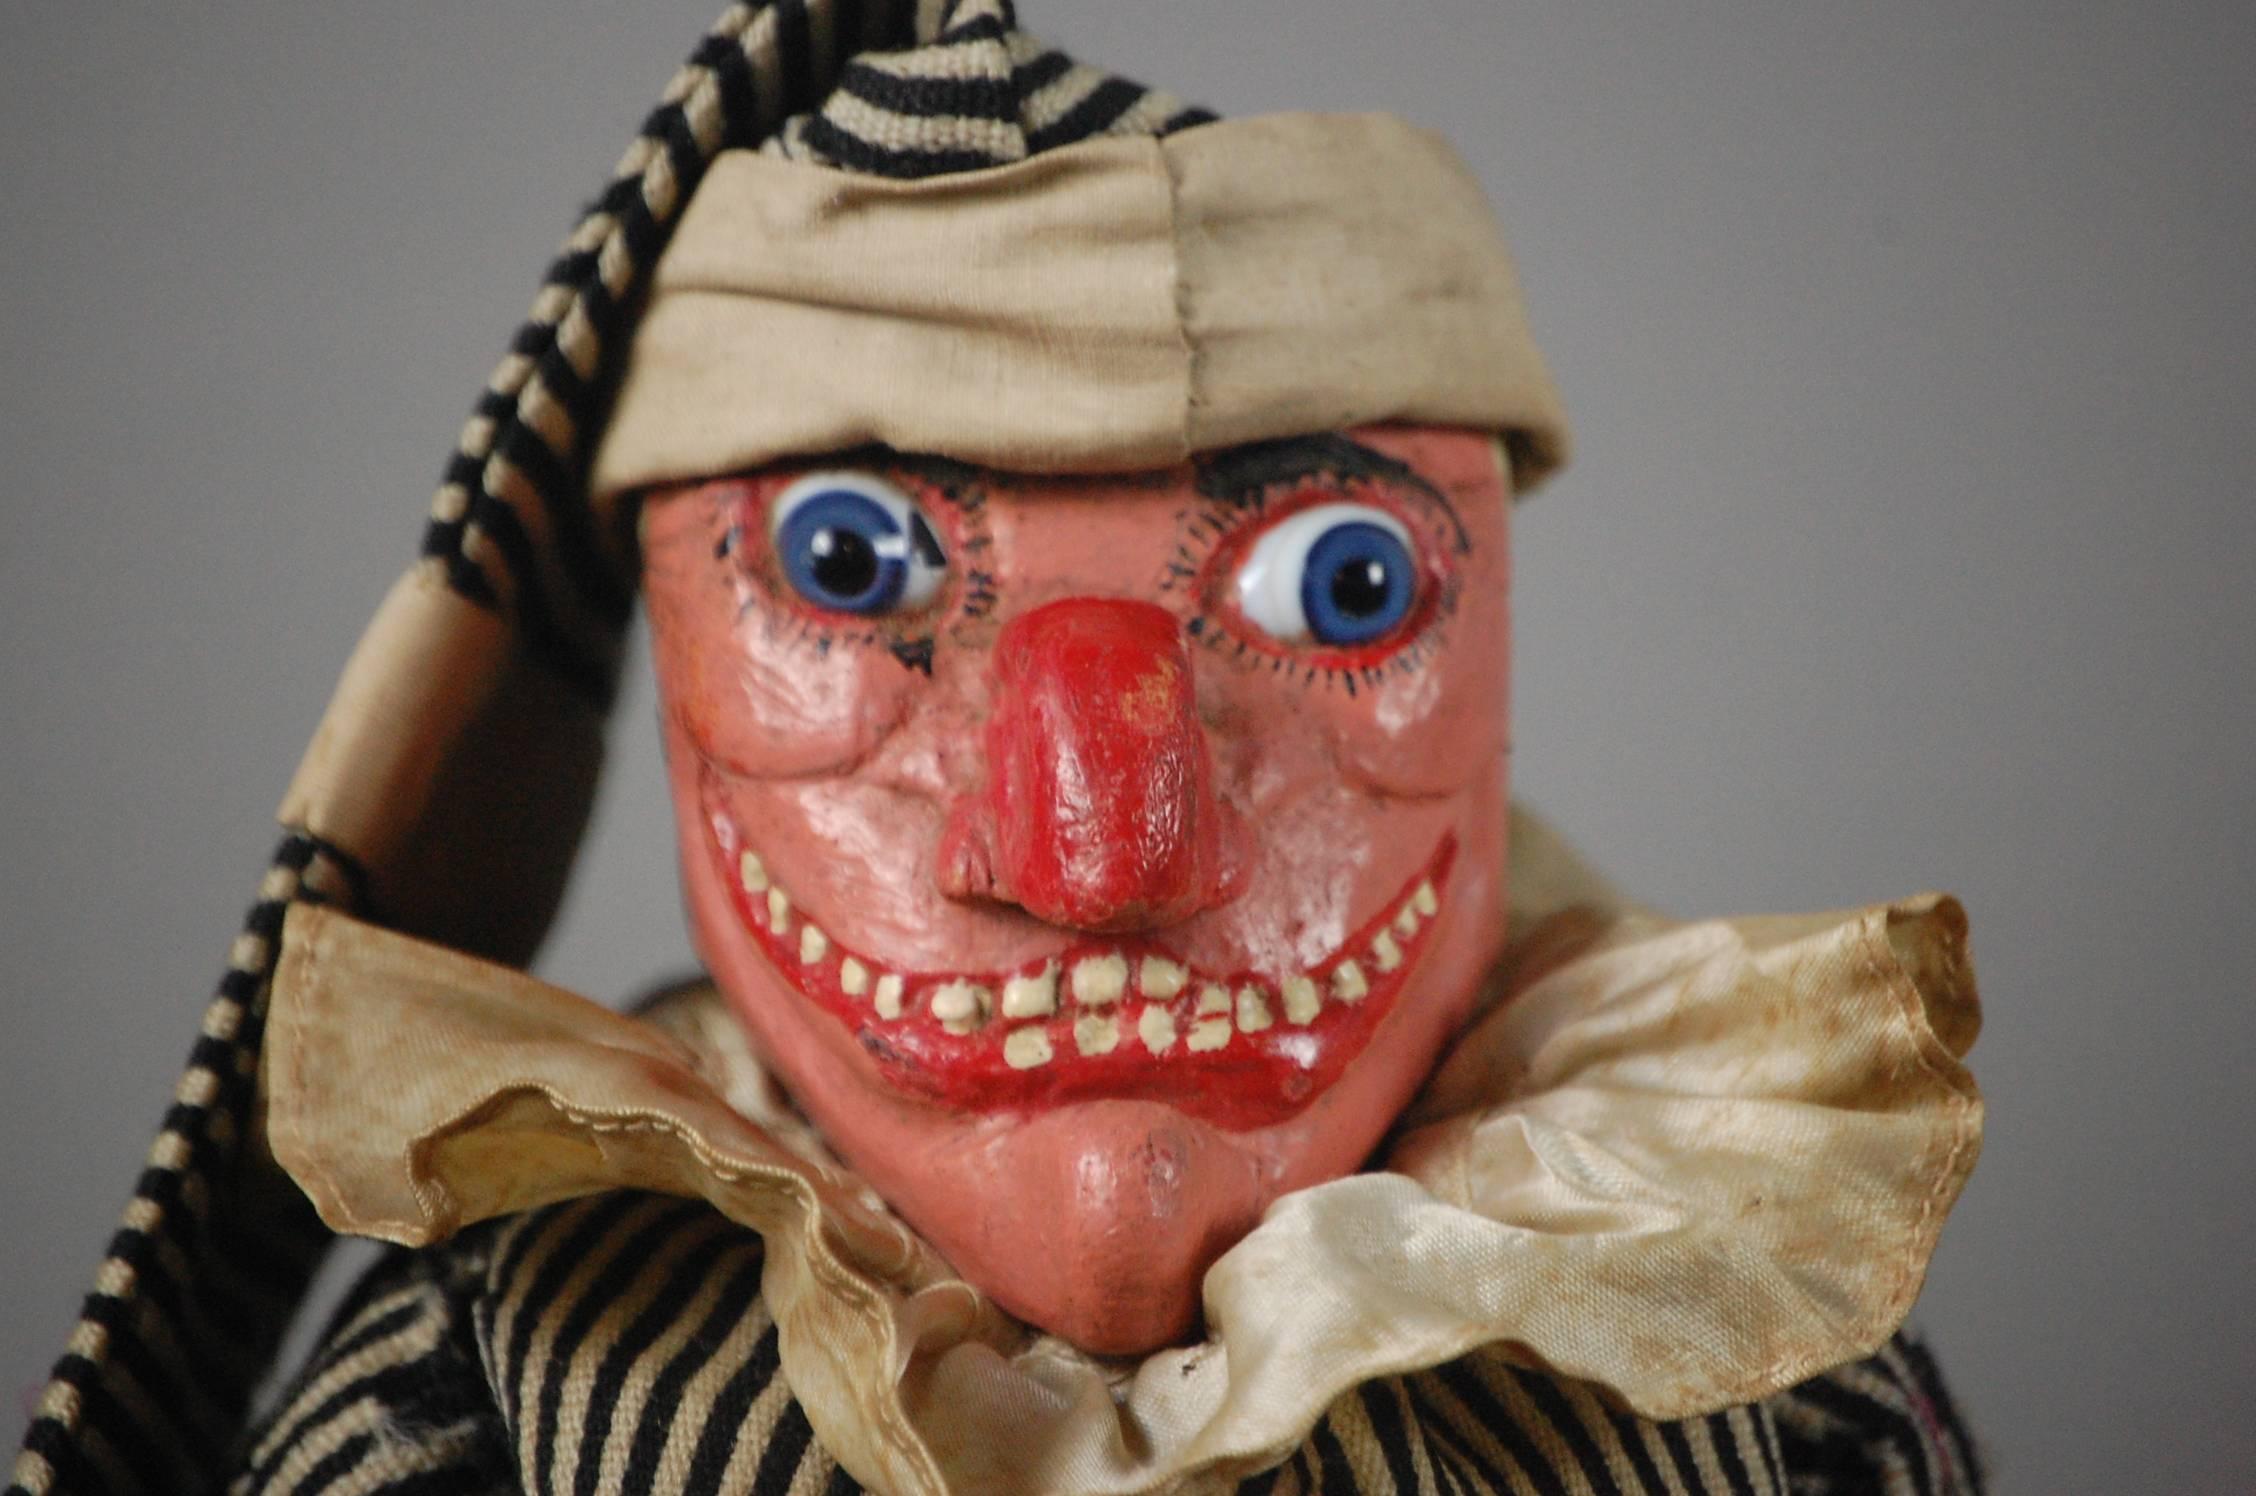 Late 19th century Mr Punch puppet, carved wood, original paint and original glass eyes. Fabulous paunch, England, circa 1880.